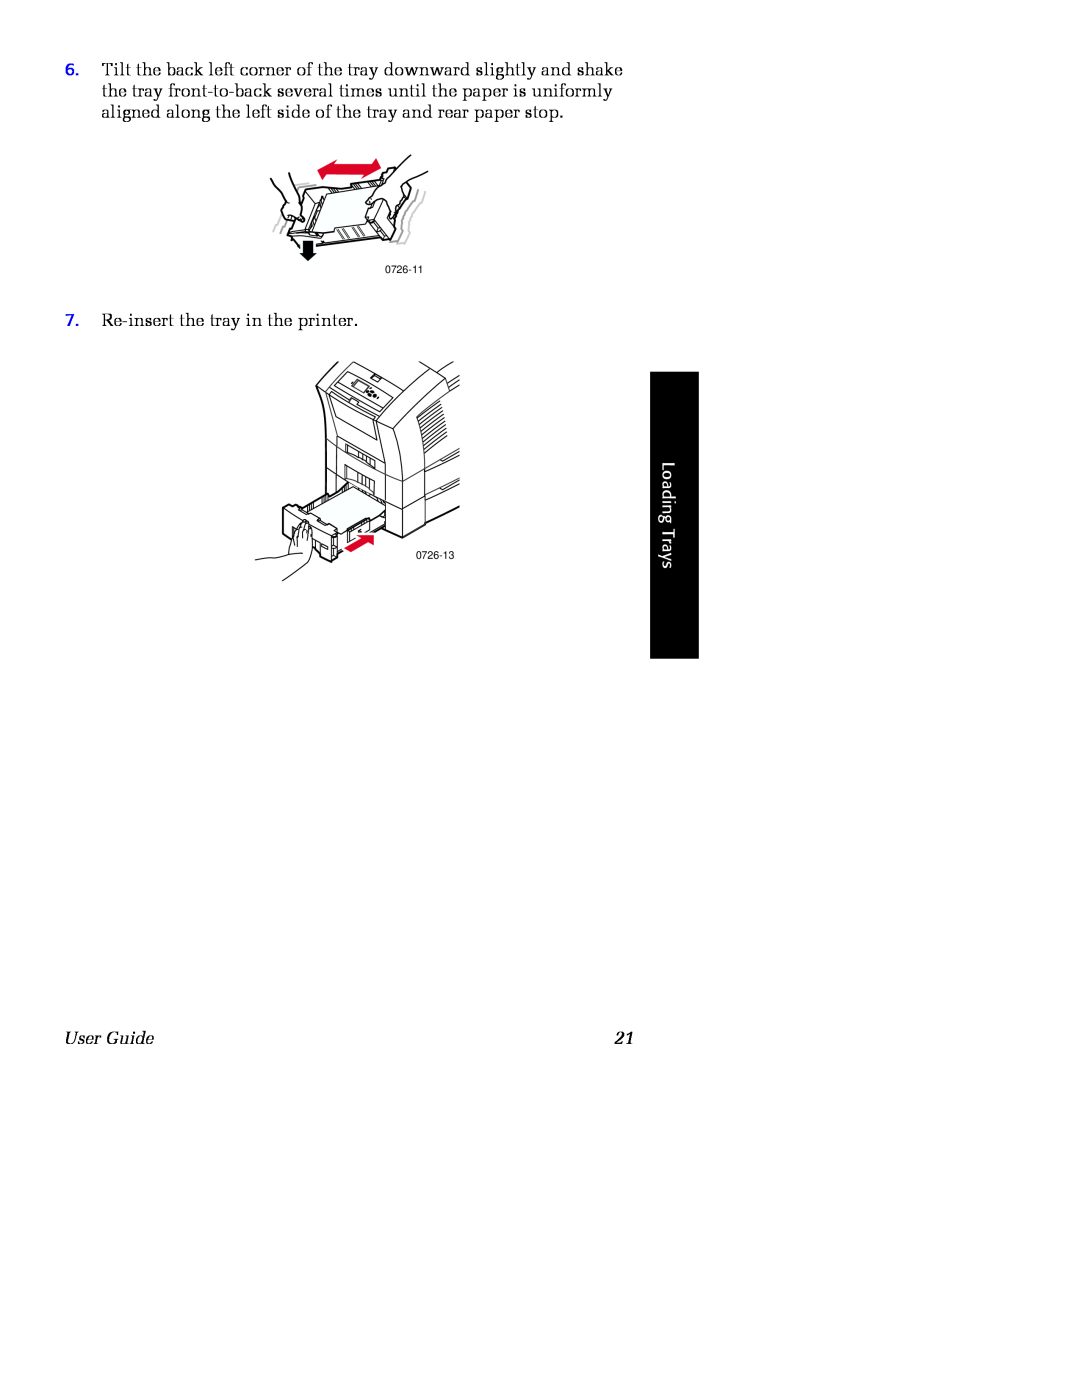 Xerox Phaser 860 manual Re-insert the tray in the printer, Loading Trays, User Guide, 0726-11, 0726-13 